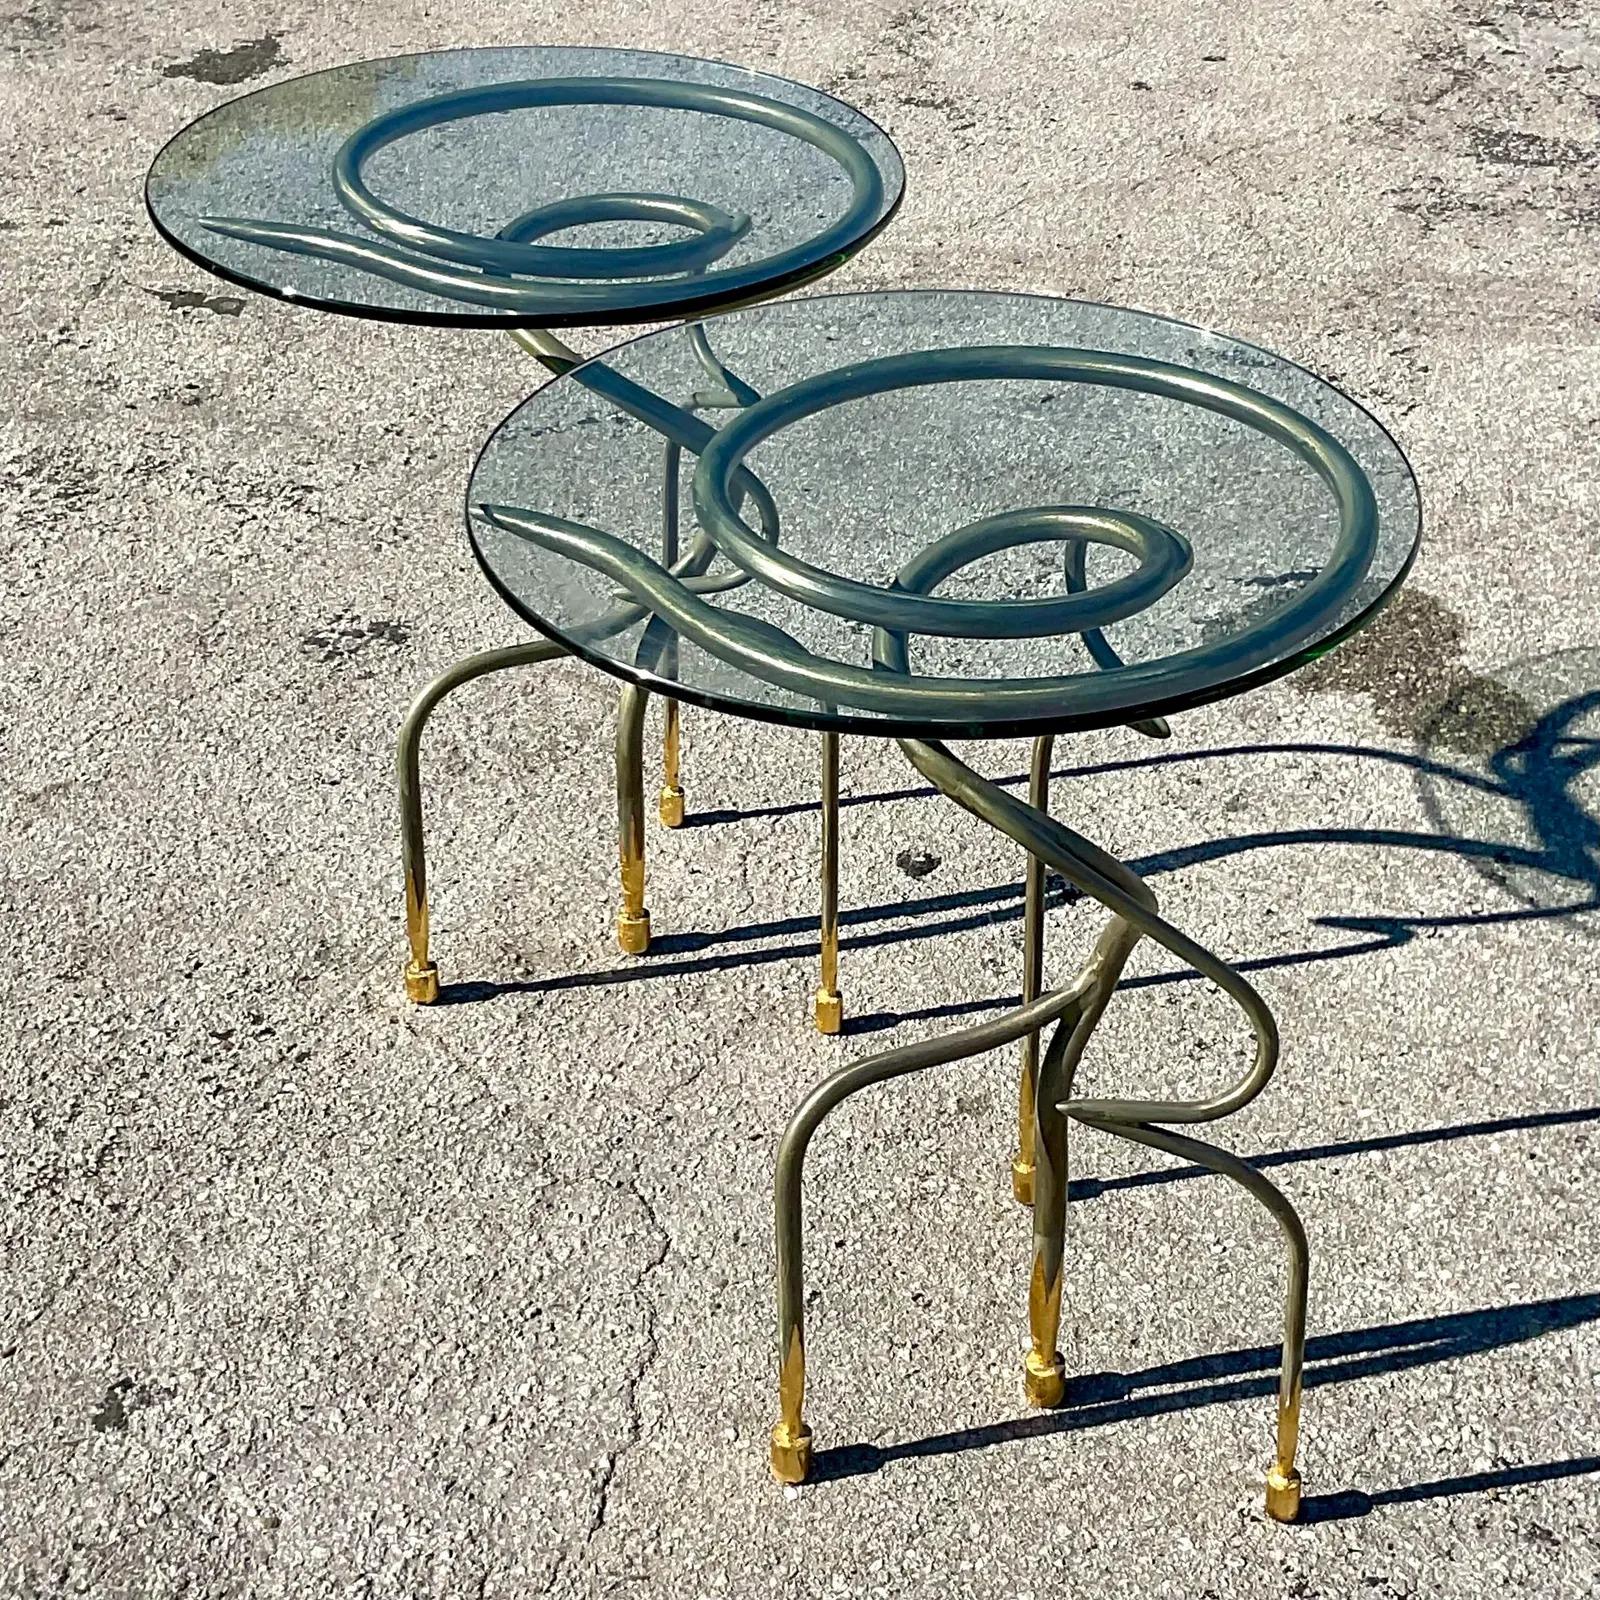 A fabulous pair of vintage Contemporary side tables. a chic abstract swirl design in steel. The legs are tipped in gold leaf. Acquired from a Palm Beach estate.